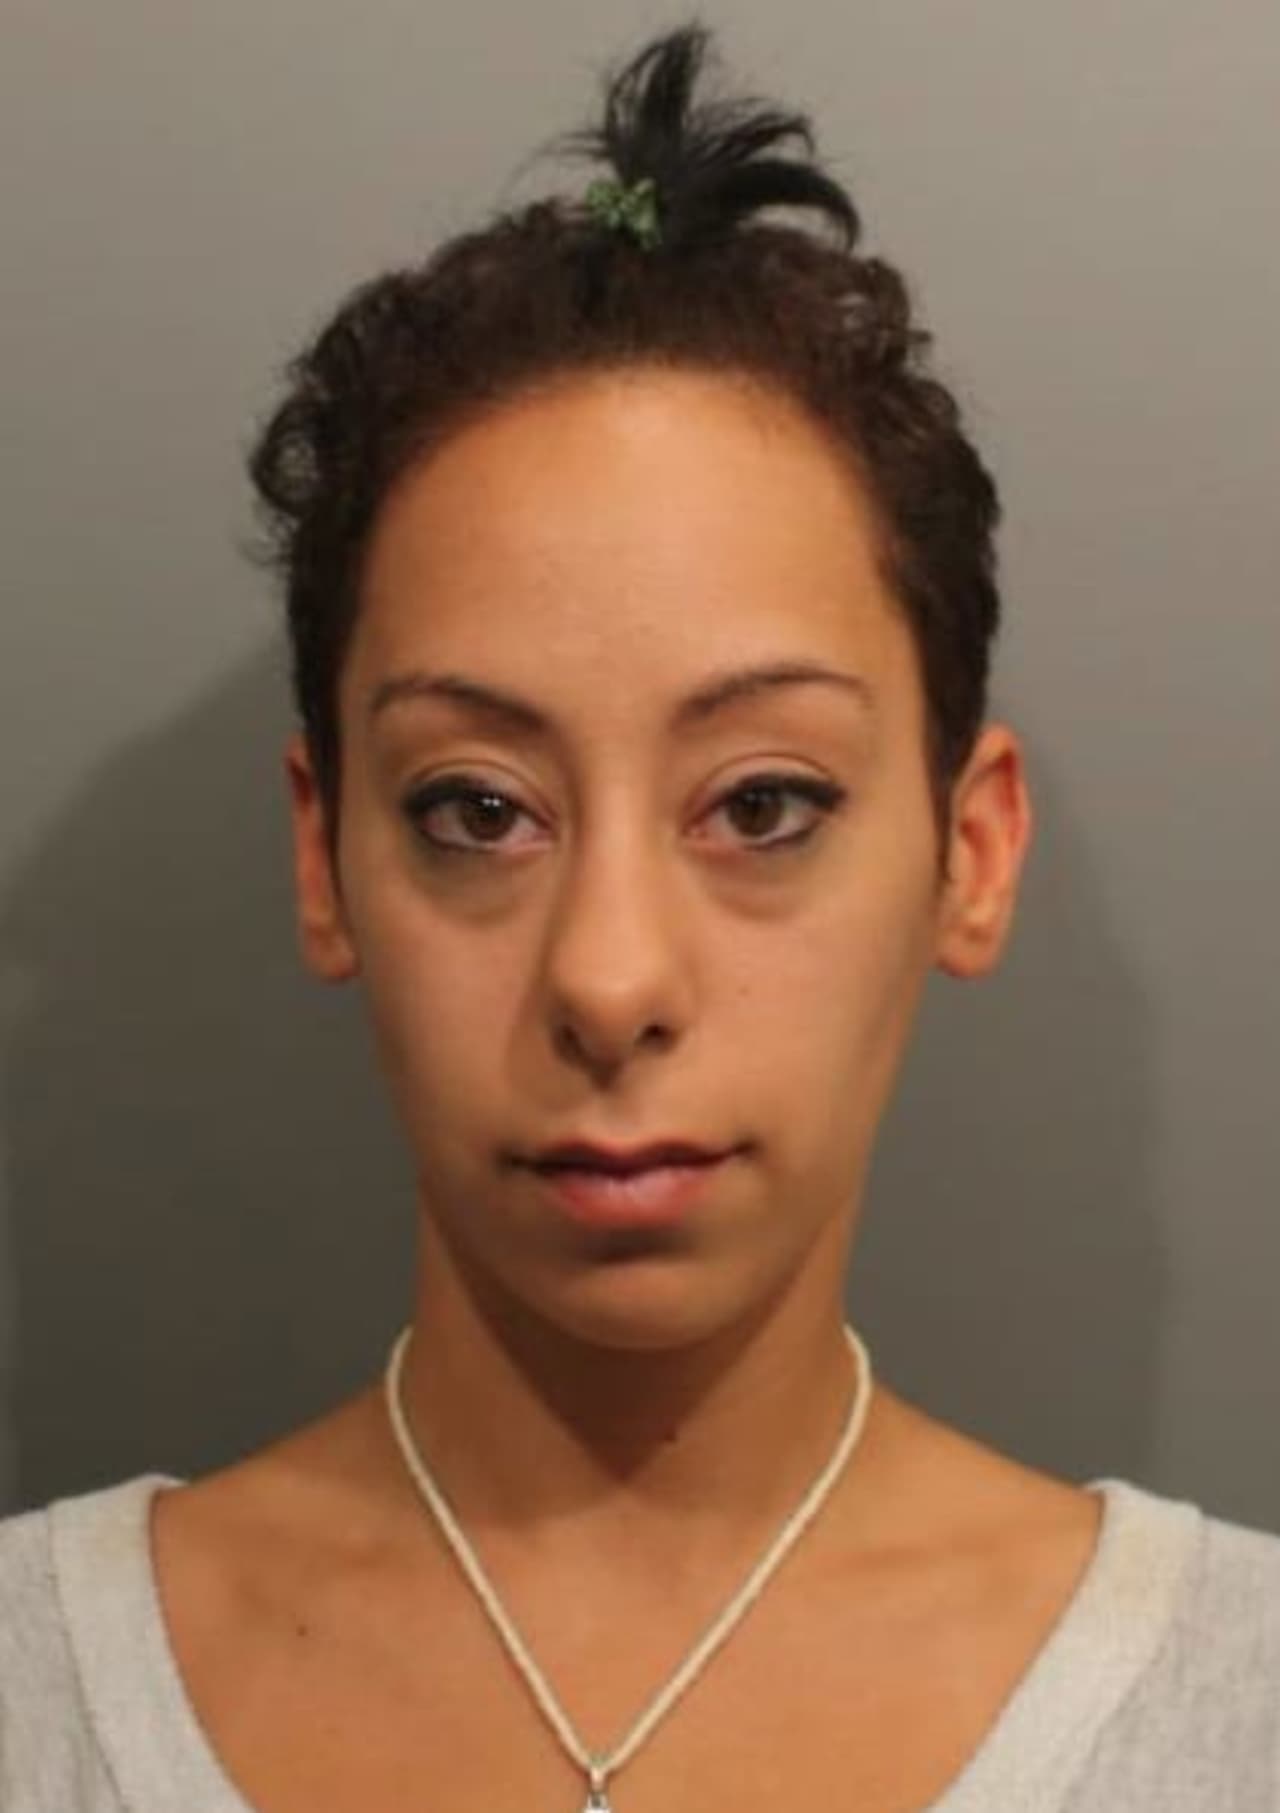 Angelica Pasakiolis, 27, of Wilton was arrested after slamming into a utility pole with her 3-year-old and 1-year-old children in the vehicle, Wilton Police said.